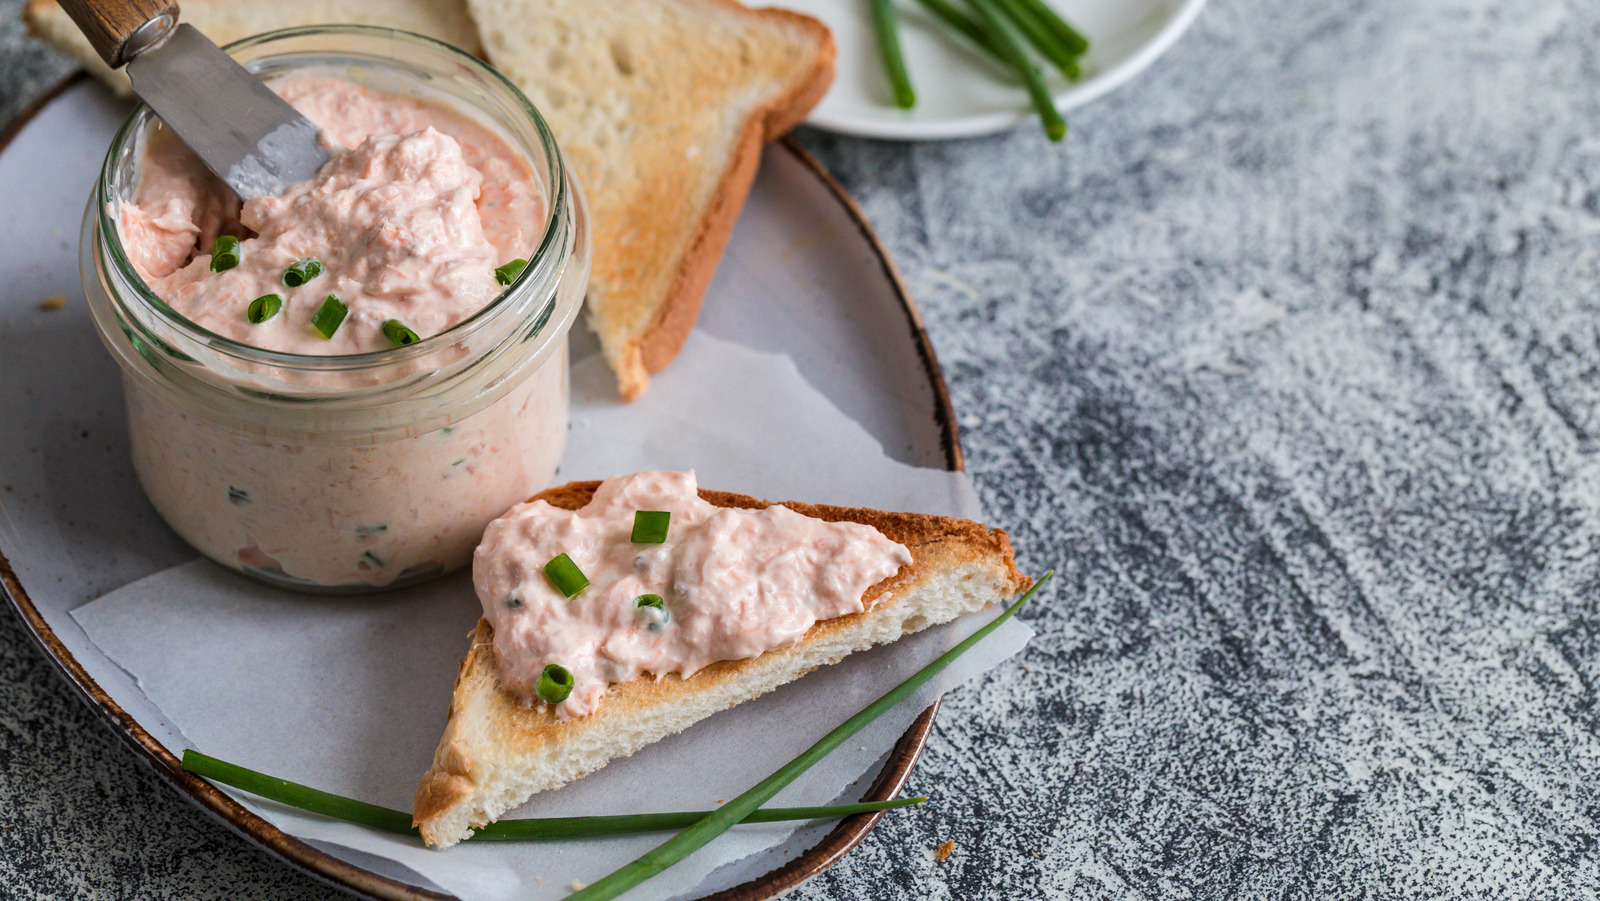 What Makes Creamed Tuna Different From The Classic Salad?